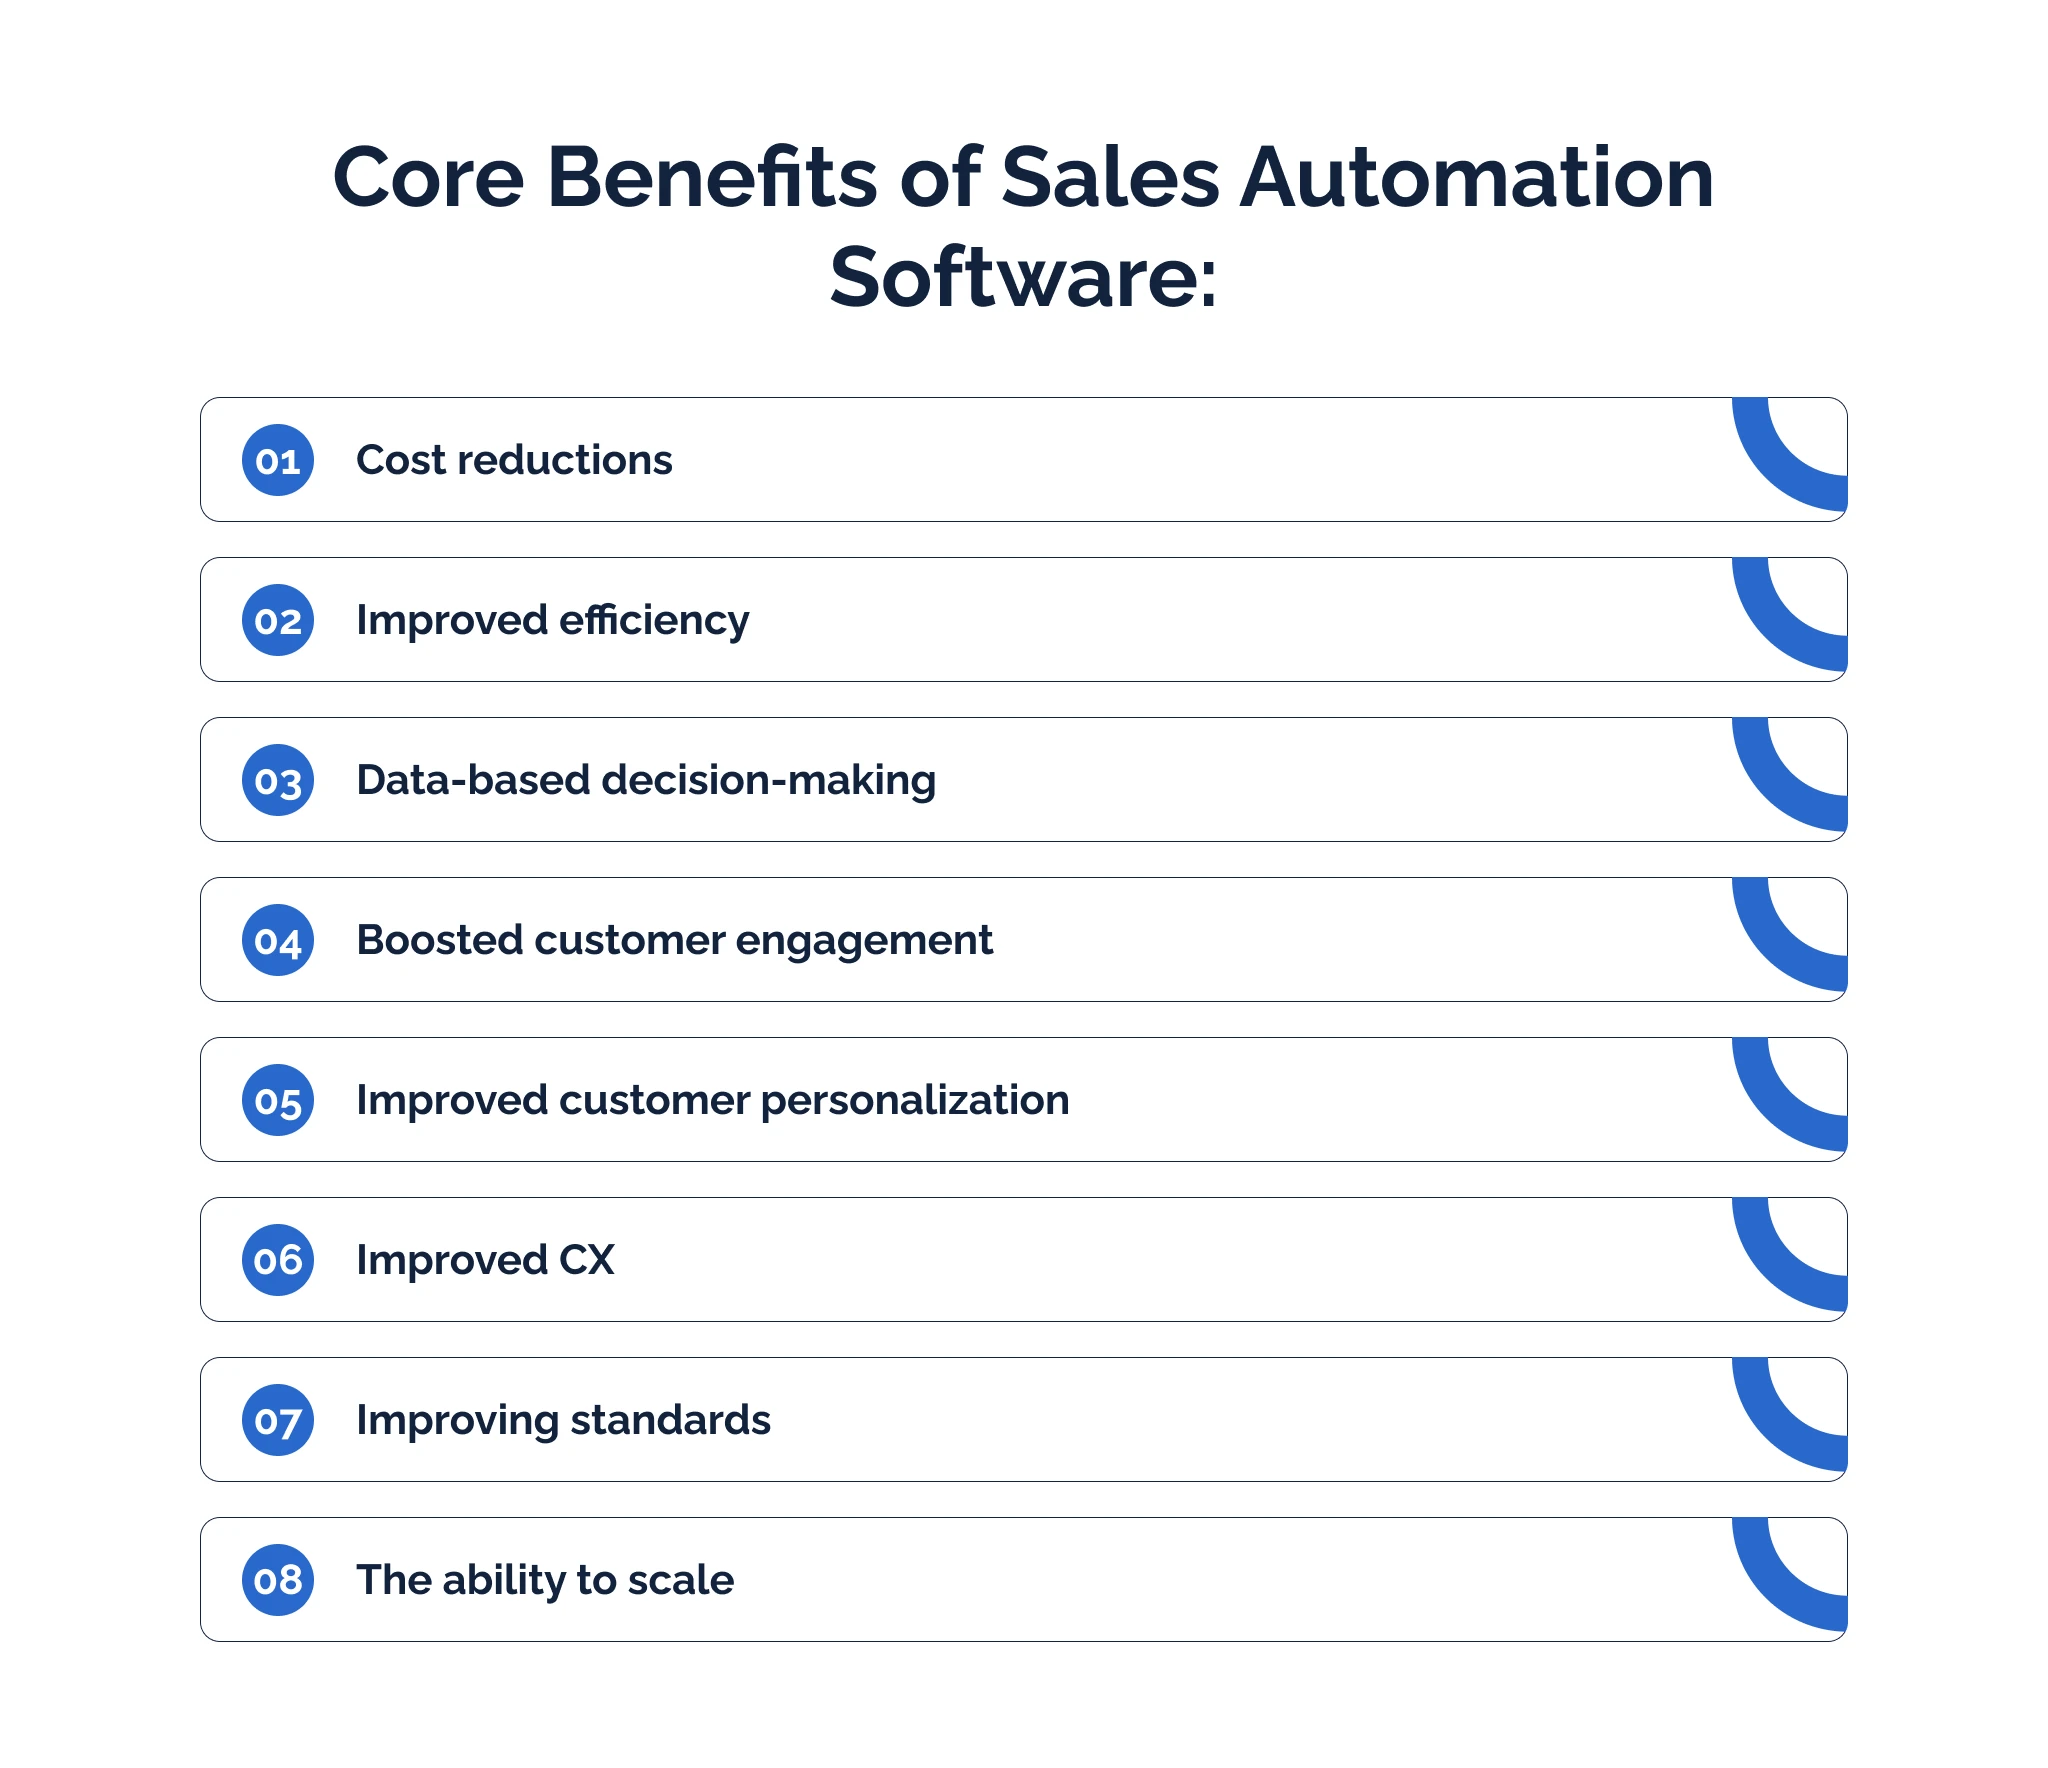 Core benefits of sales automation software